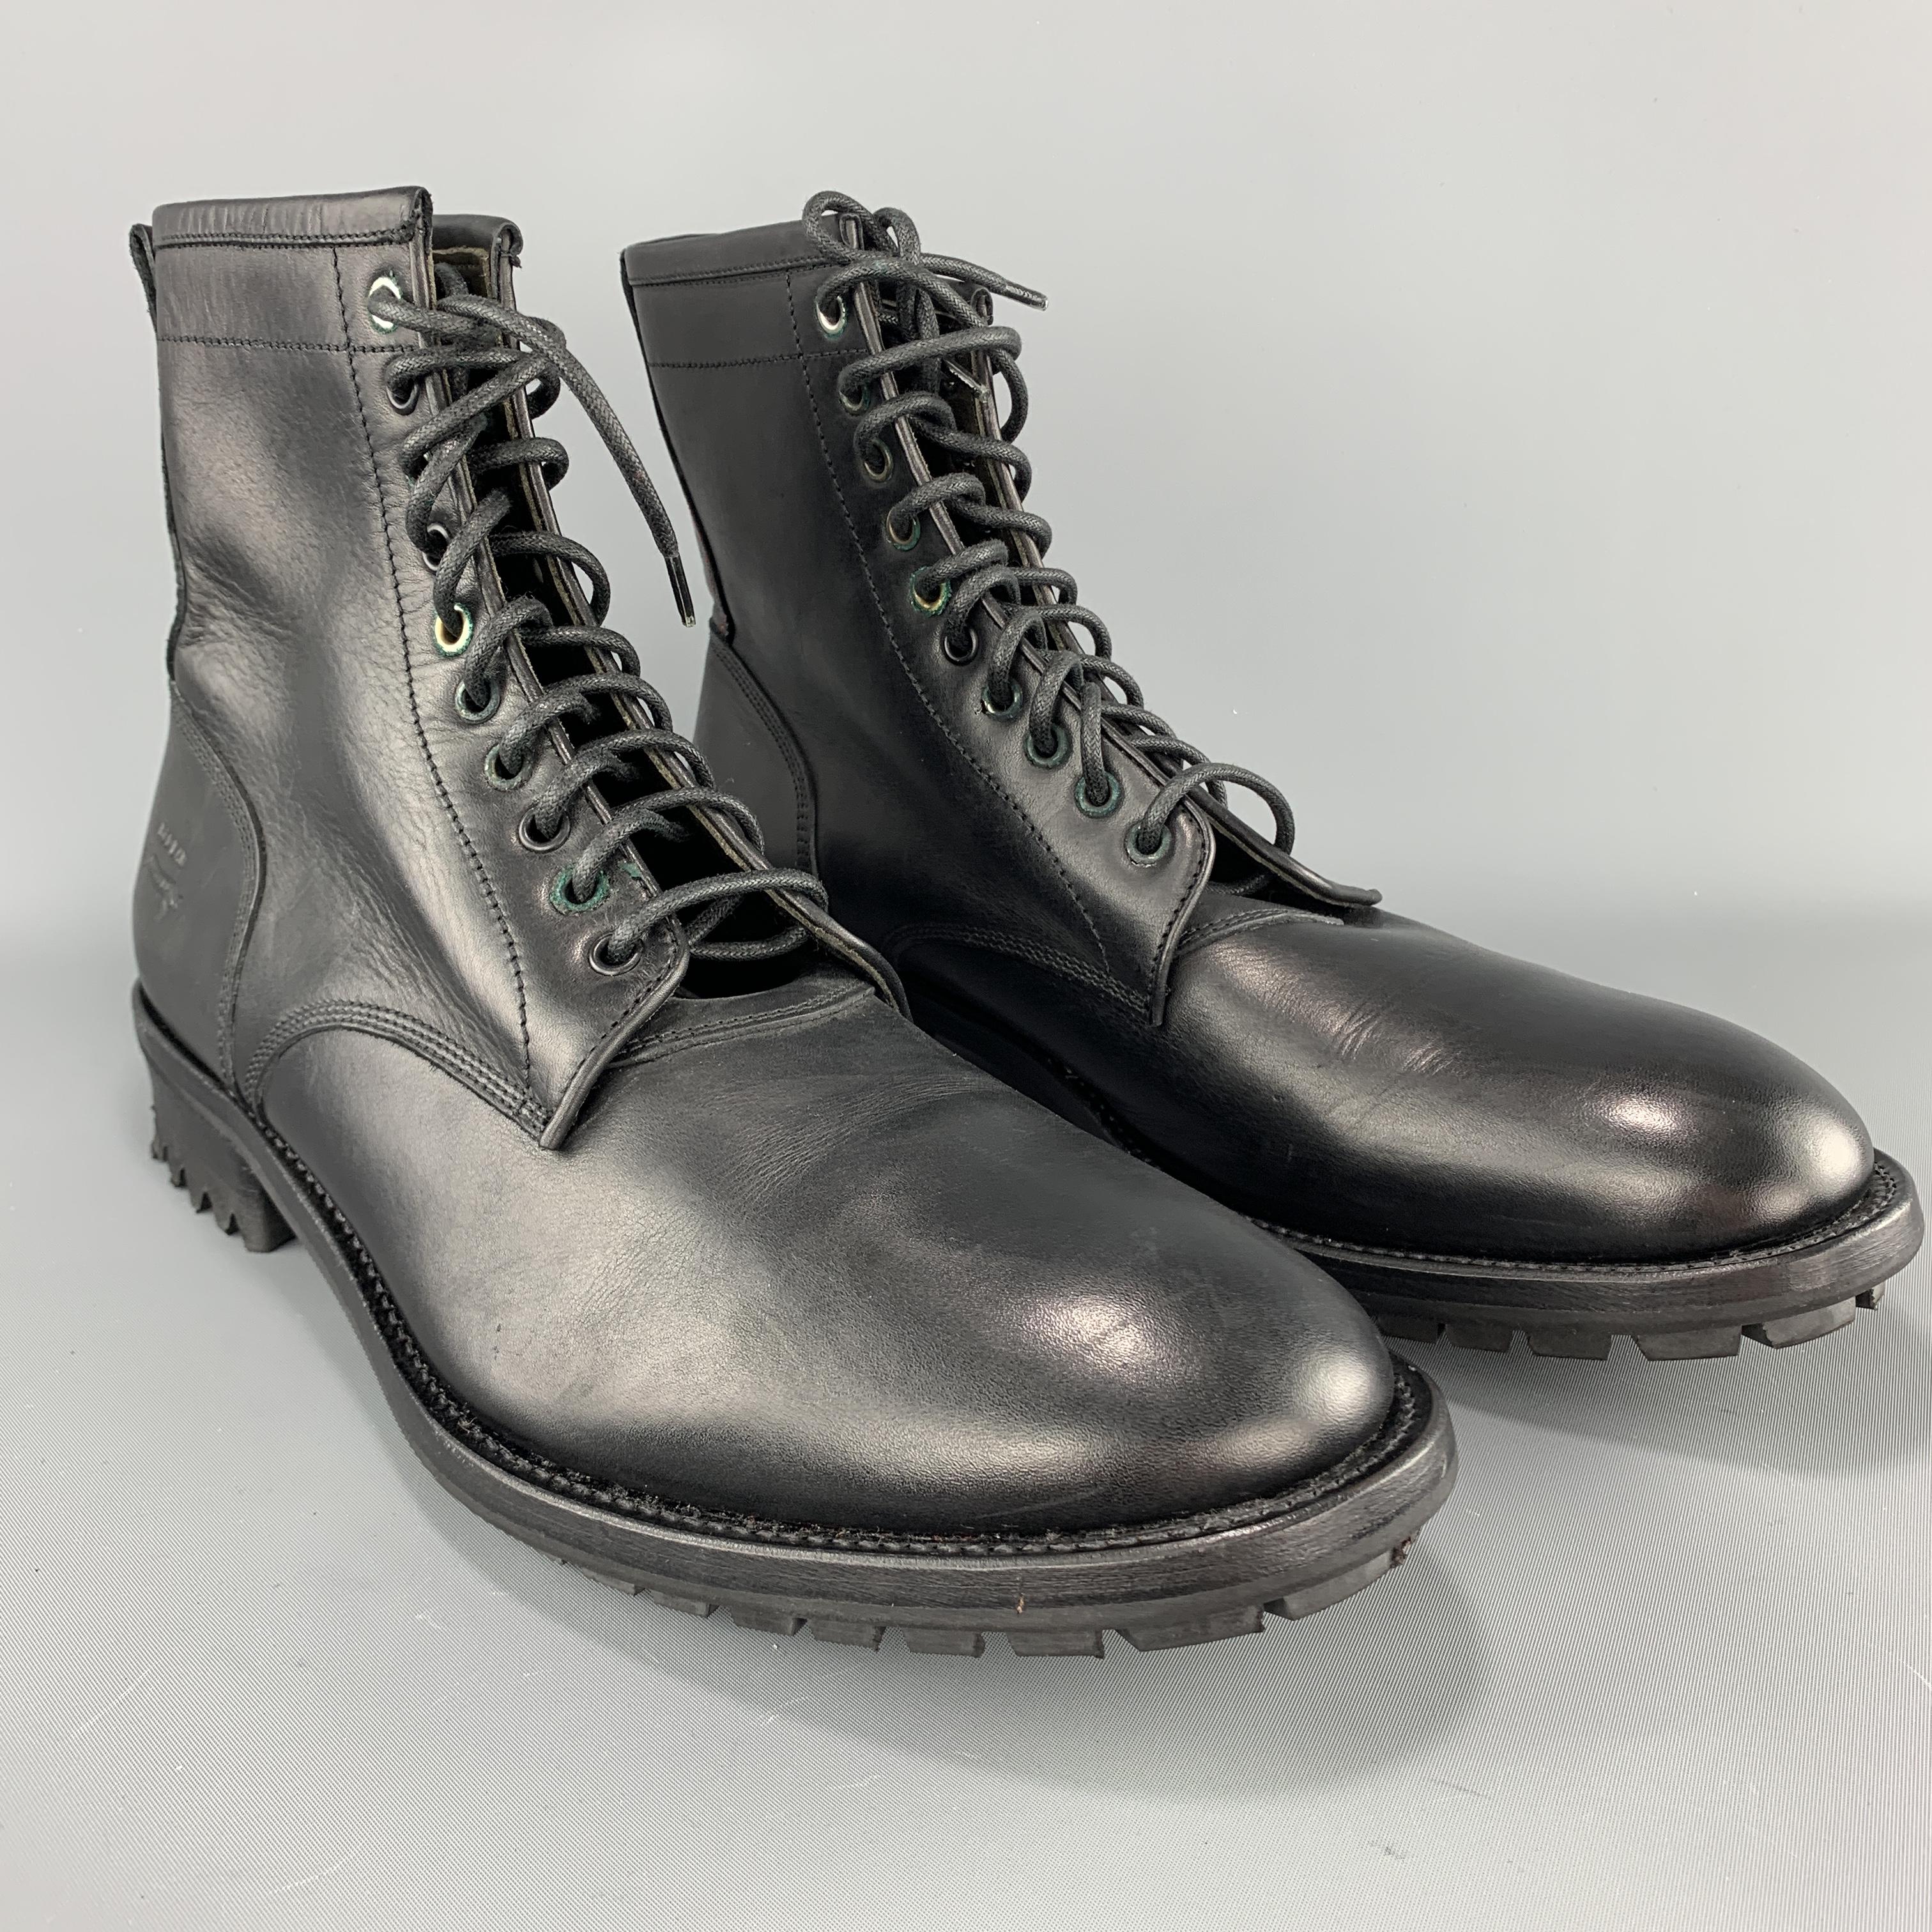 RED EAR PAUL SMITH boots come in black leather with a heeled rubber sole and lace up front. Made in Italy.

Excellent Pre-Owned Condition.
Marked: UK 11

Outsole: 13 x 4.5 in. 
Height: 6.5 in.